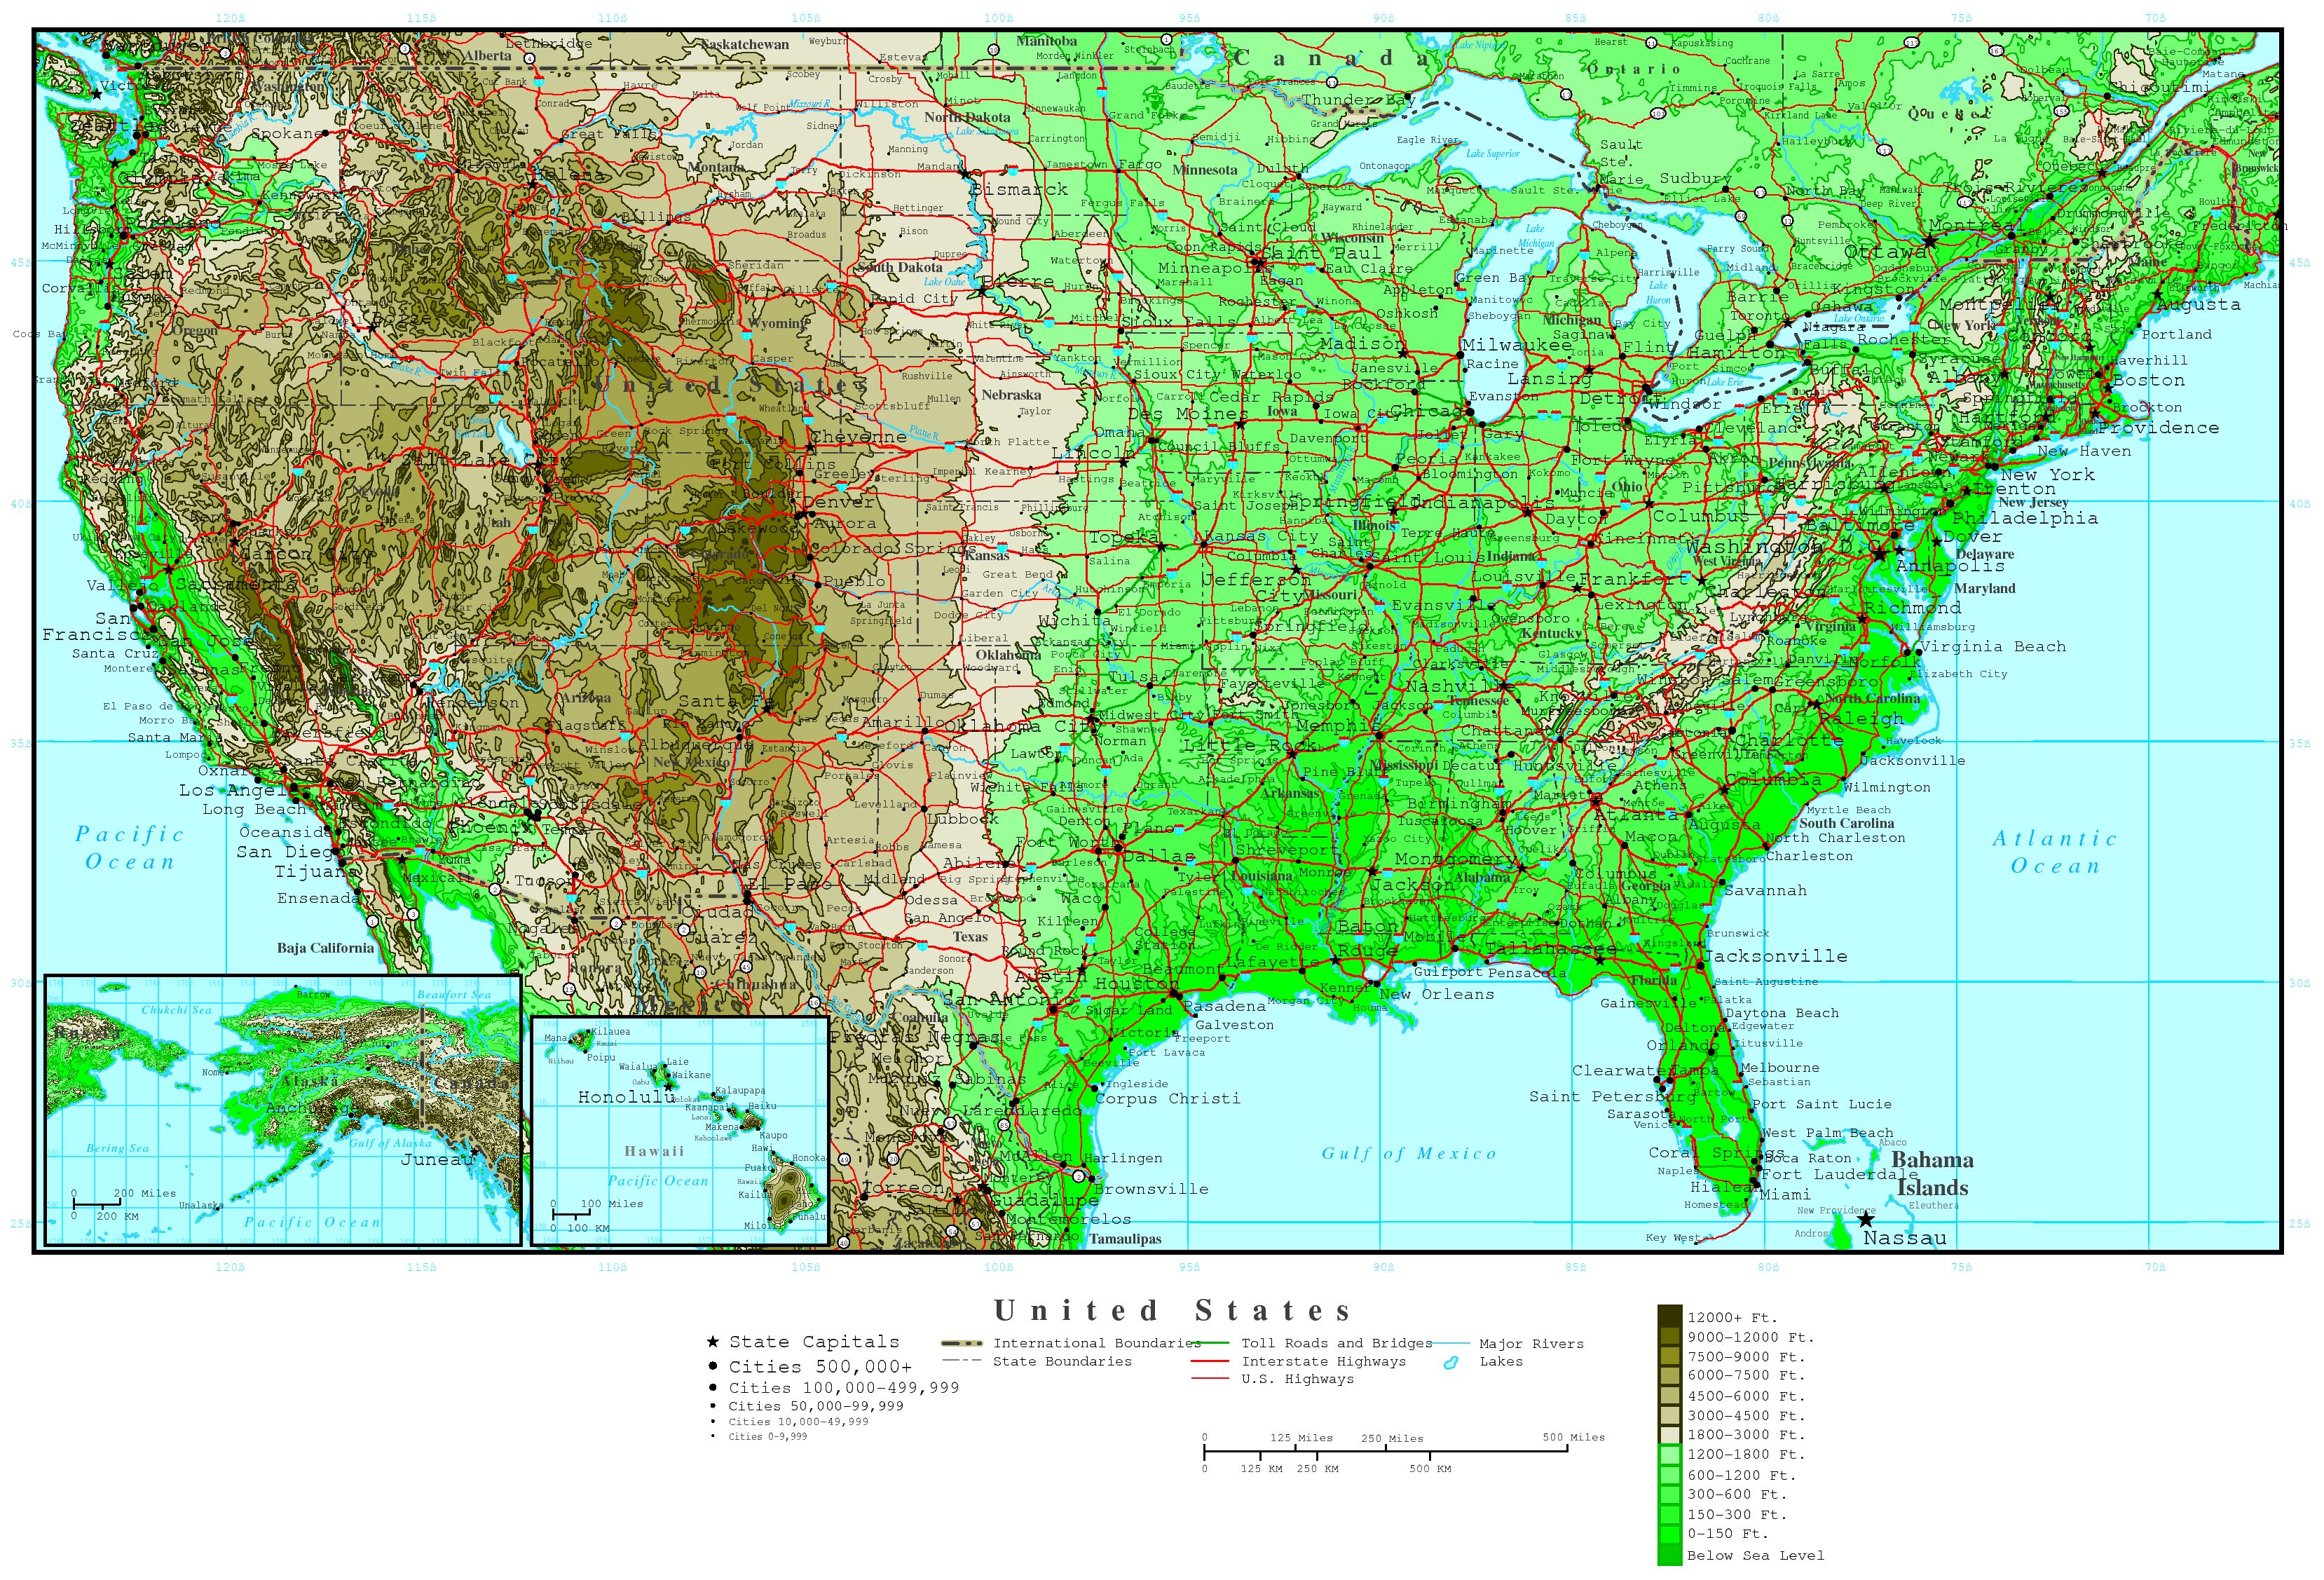 topographic elevation map of the united states Large Detailed Road And Elevation Map Of The Usa The Usa Large topographic elevation map of the united states